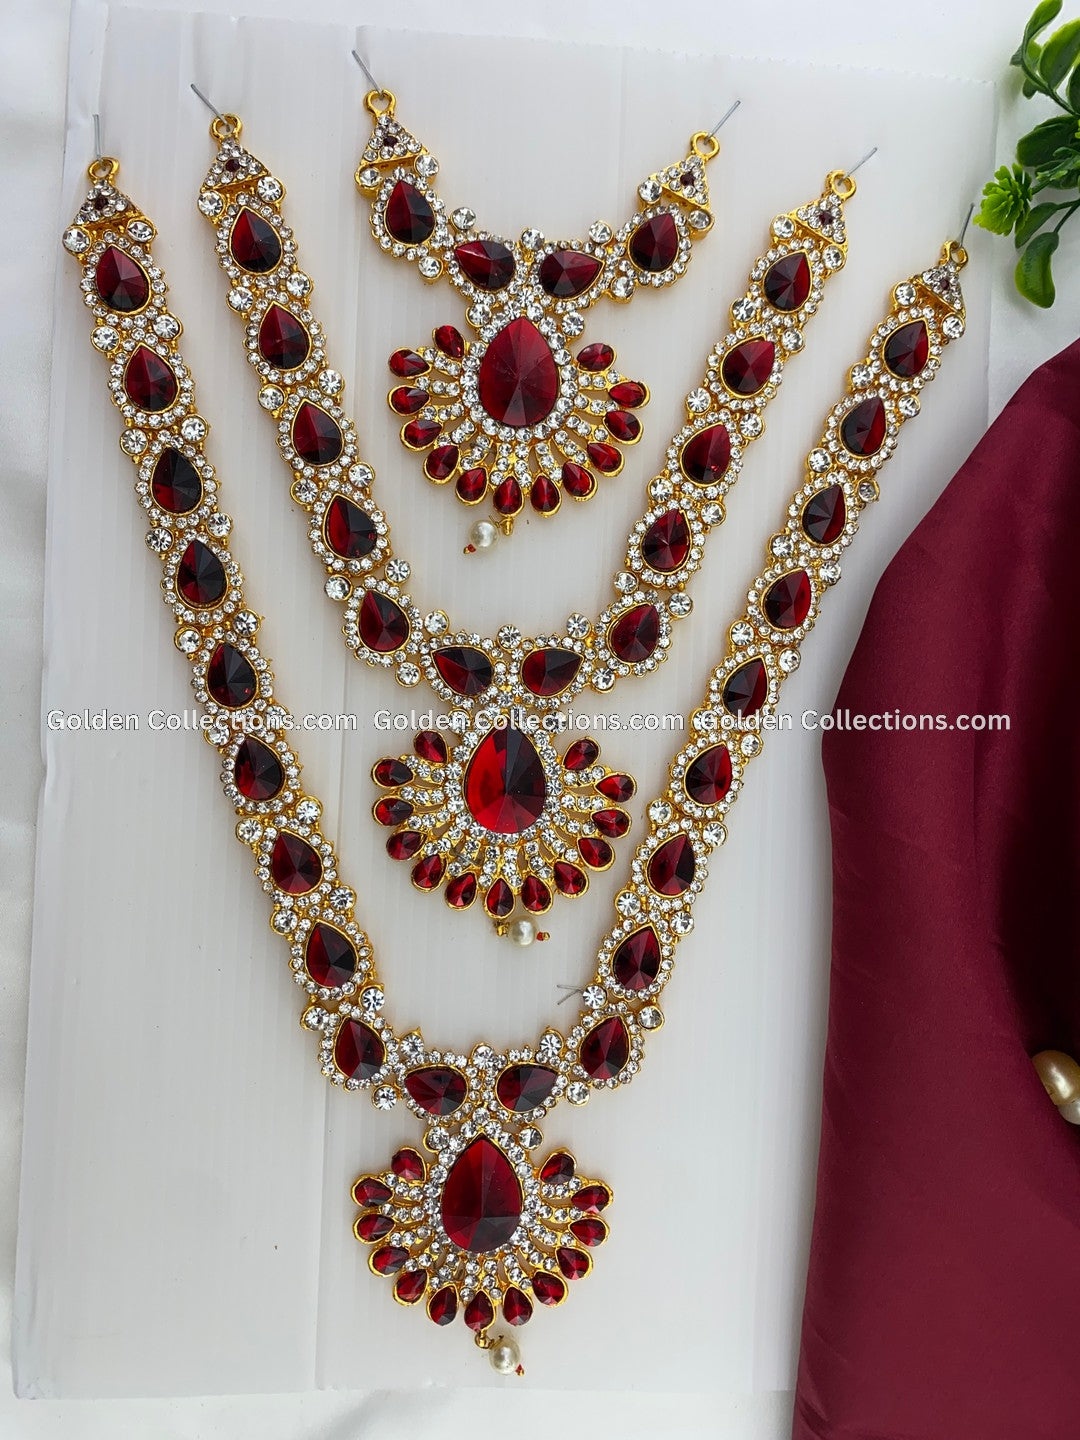 Deity Goddess Jewellery - Graceful Charms - GoldenCollections